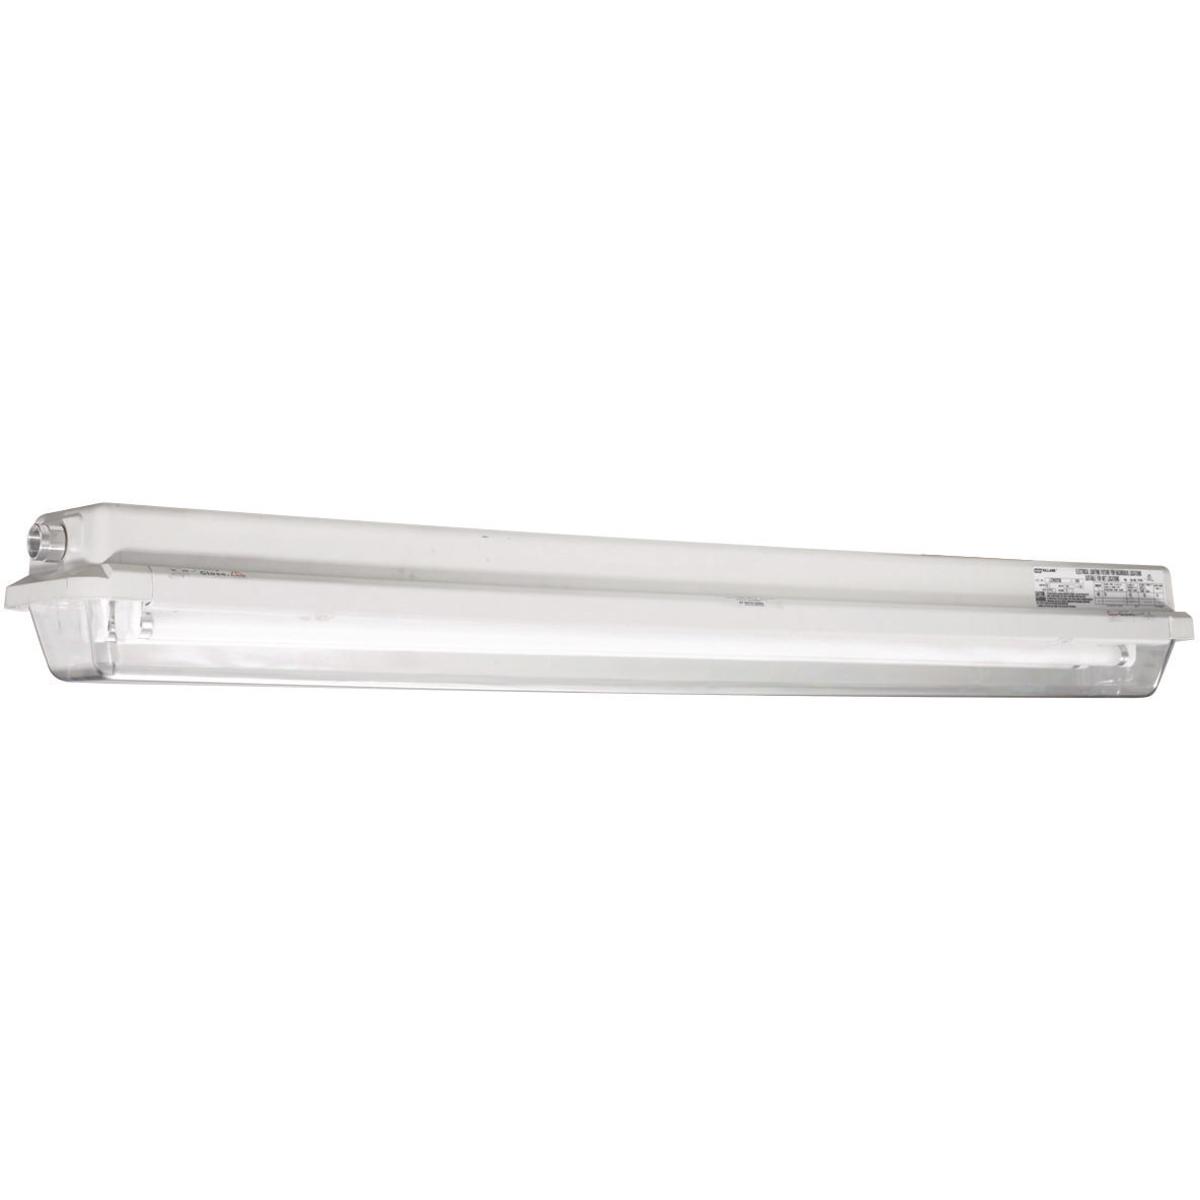 Hubbell LZ2NE2-32330 LZ2NE2 Series - Non-Metallic 32 Watt Fluorescent Emergency Power Light Fixture (Three 4-Foot Lamps Not Included) - Double-Ended Lamp Type -120-277V At 60Hz - Hub Size 3/4 Inch NPT  ; NEMA 4 & IP66 rated enclosure ; Housing-one piece fiberglass reinforced 